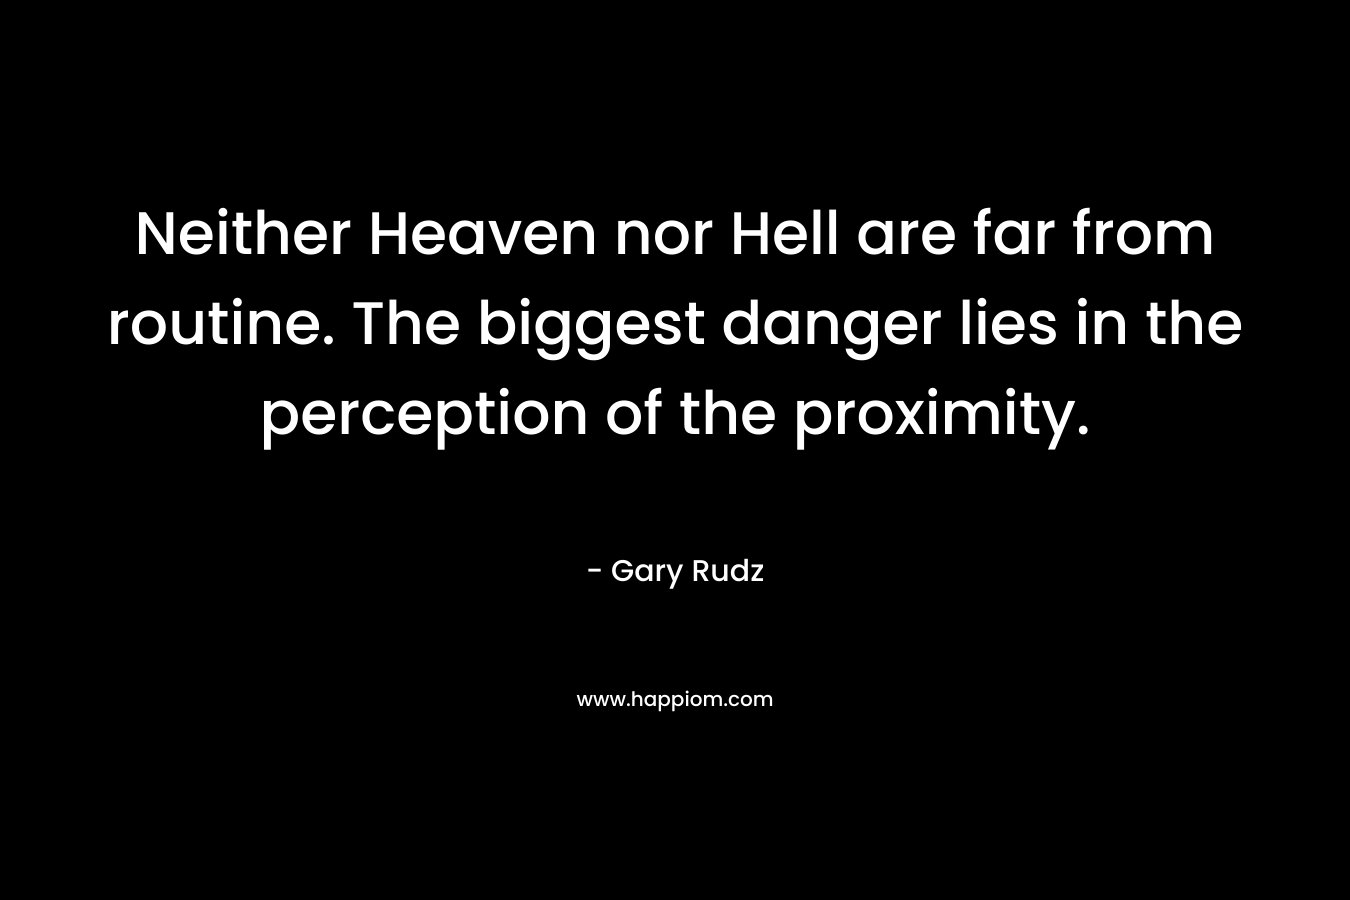 Neither Heaven nor Hell are far from routine. The biggest danger lies in the perception of the proximity. – Gary Rudz